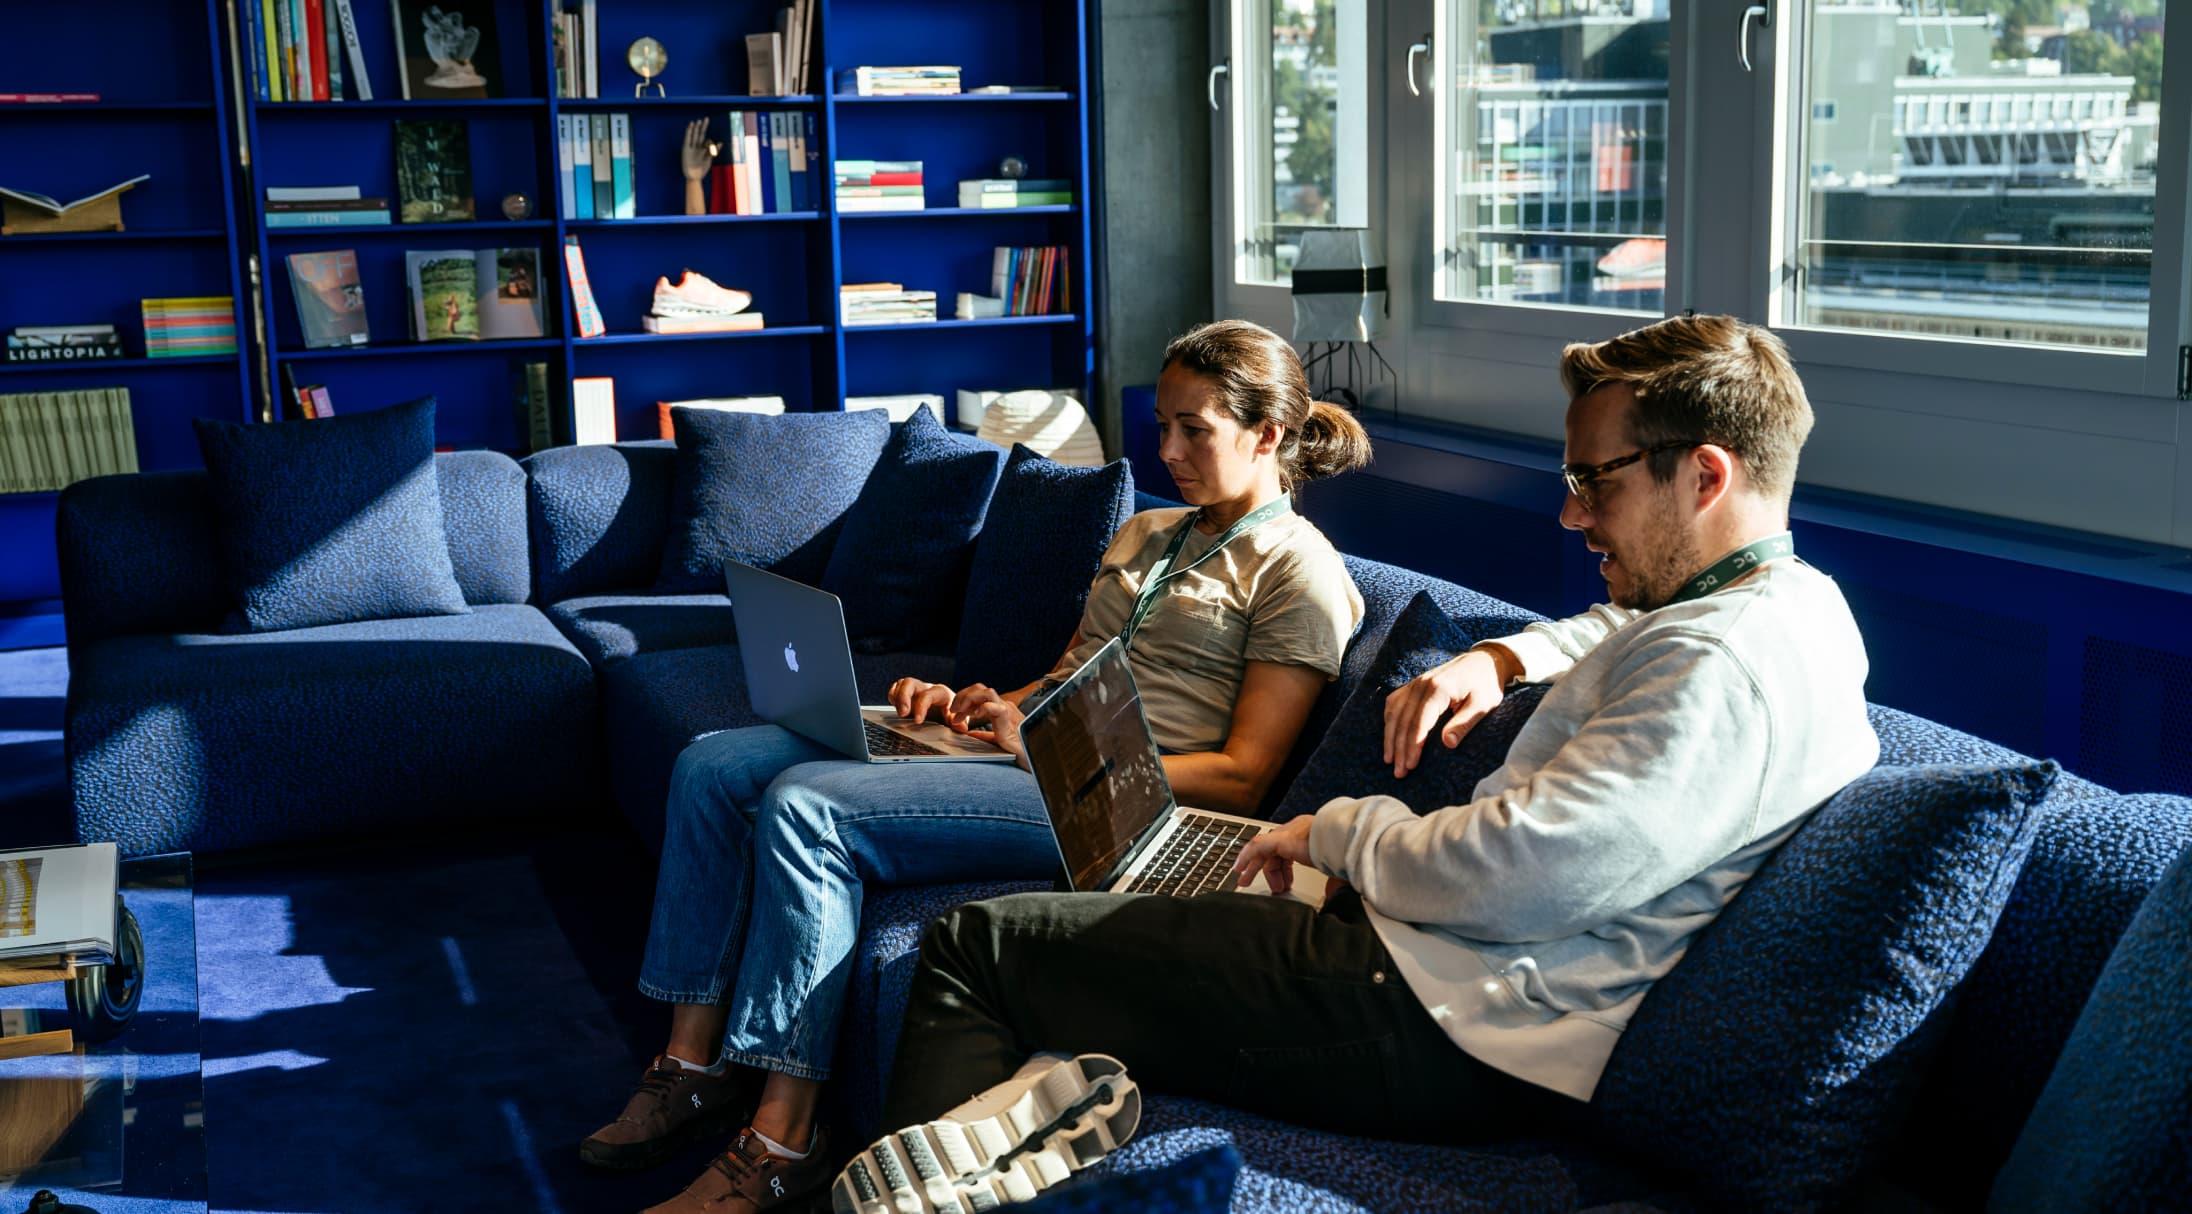 A man and woman are on laptops sitting on a big blue sofa.